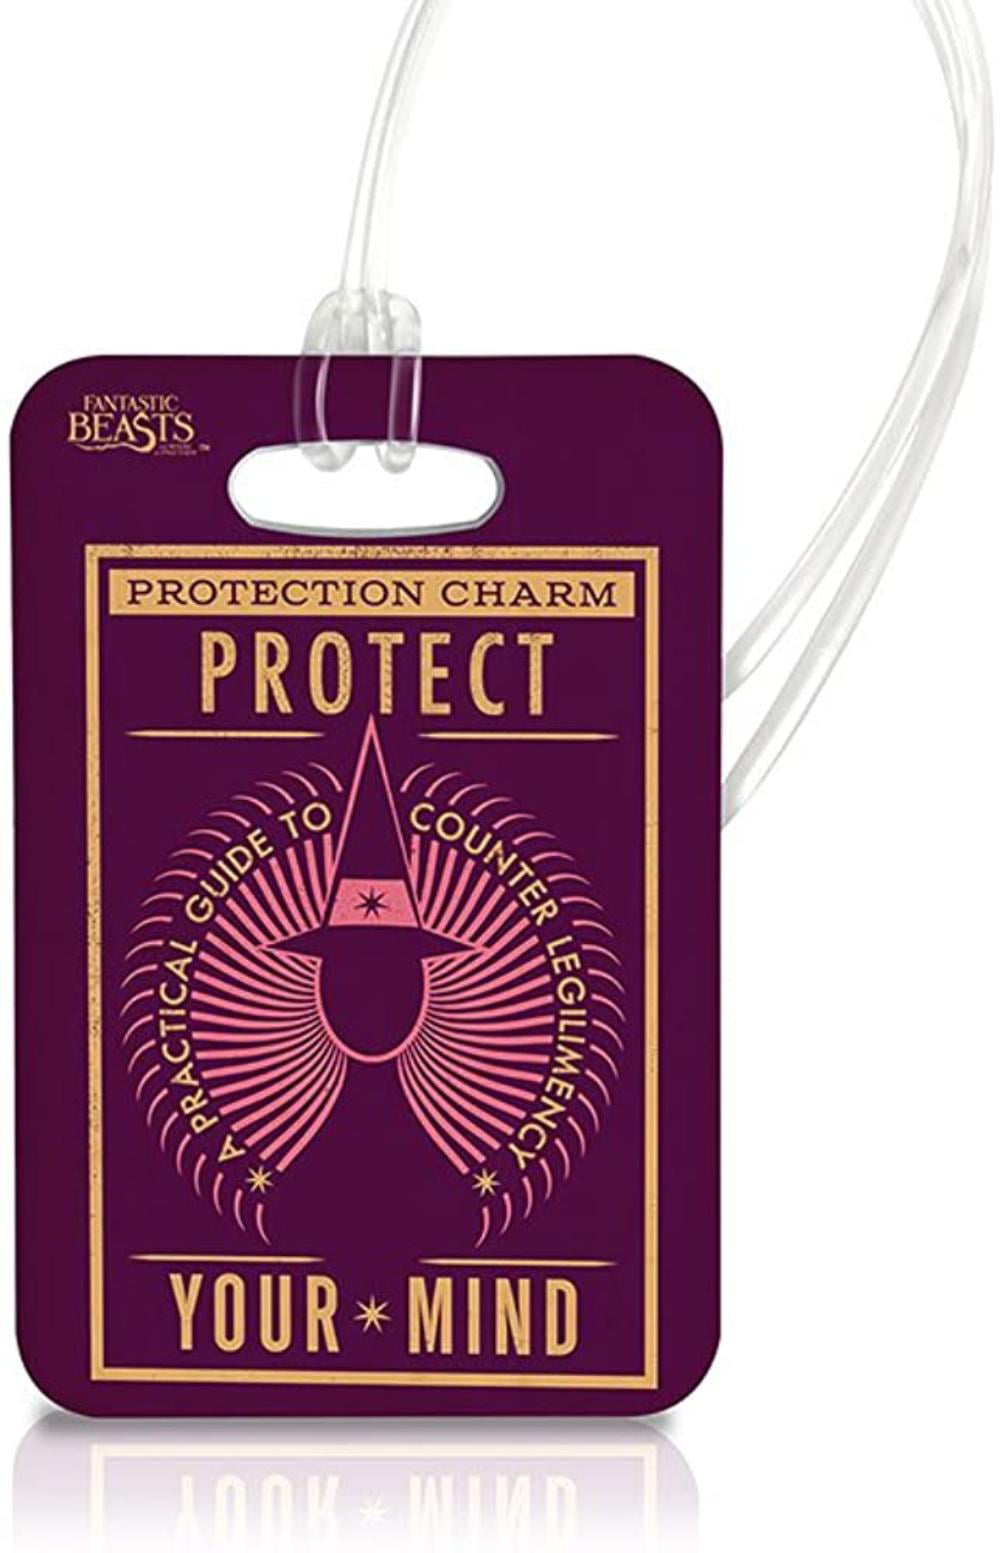 Harry Potter Inspired Characters Travel Luggage Tag Bag Tag Travel Gift